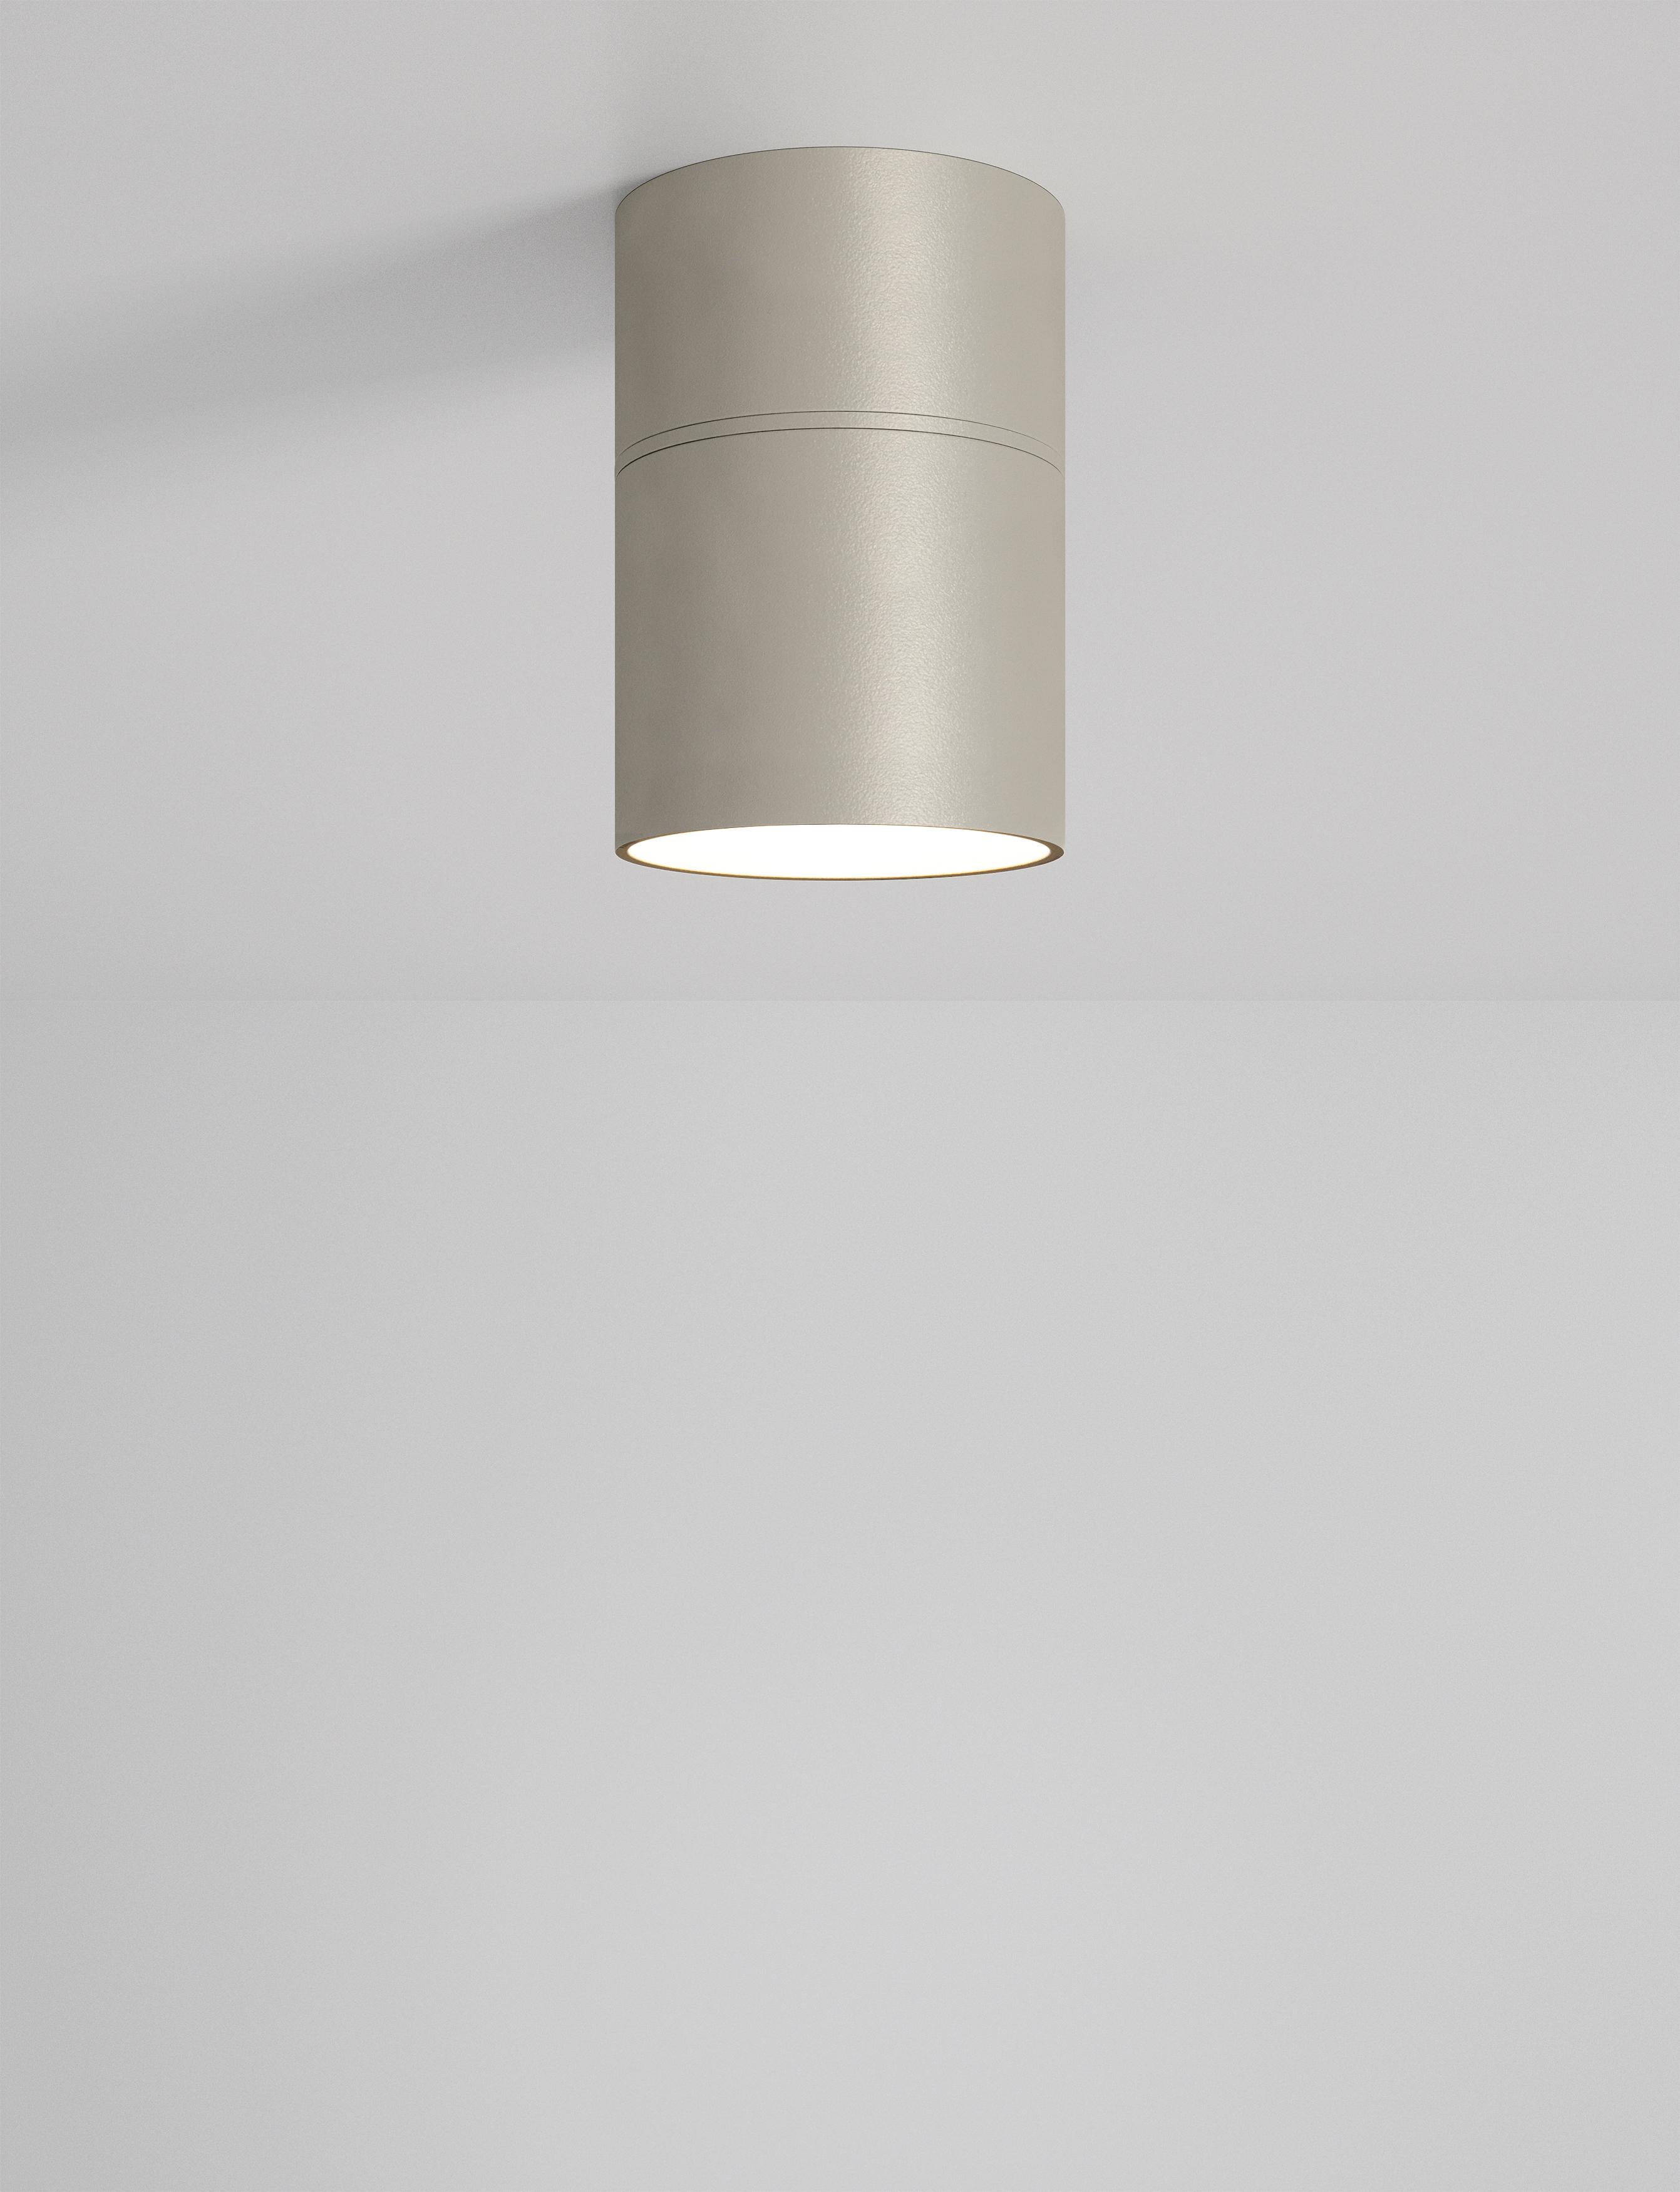 Axolight Small Pivot Ceiling Lamp in Greige by Ryosuke Fukusada

Single spotlight
The light fixtures have been designed to ensure a high visual comfort. The constant current LED chip and its lens are hosted in a recessed position inside the